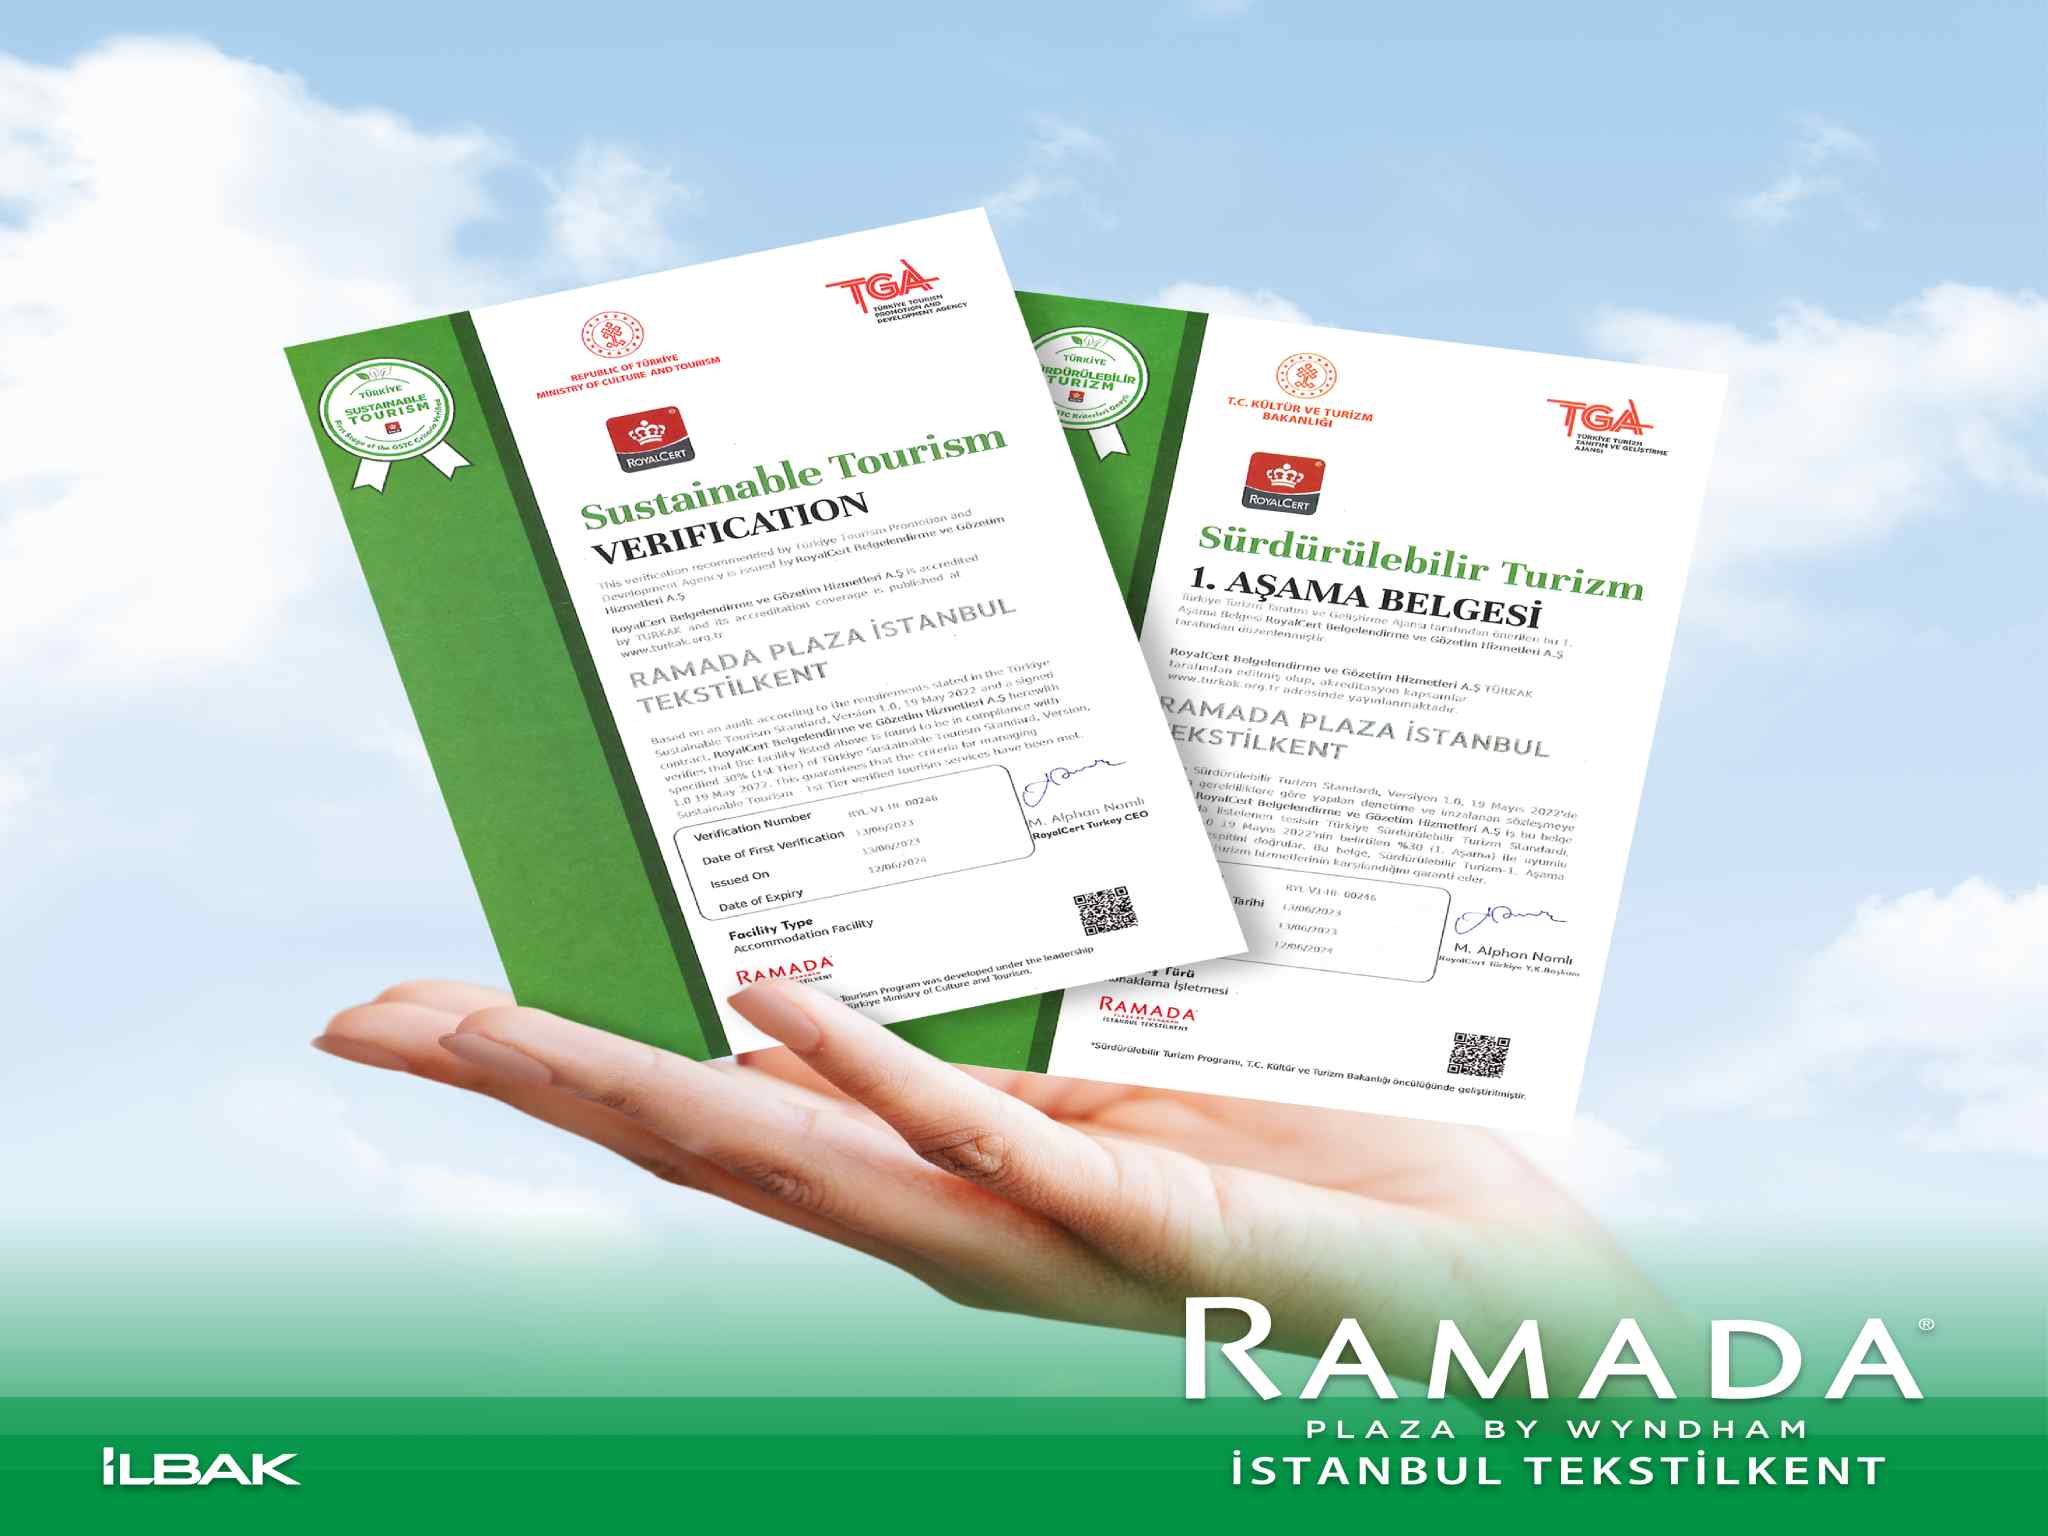 Ramada Plaza By Wyndham has been awarded the Istanbul Tekstilkent Sustainable Tourism Certificate.